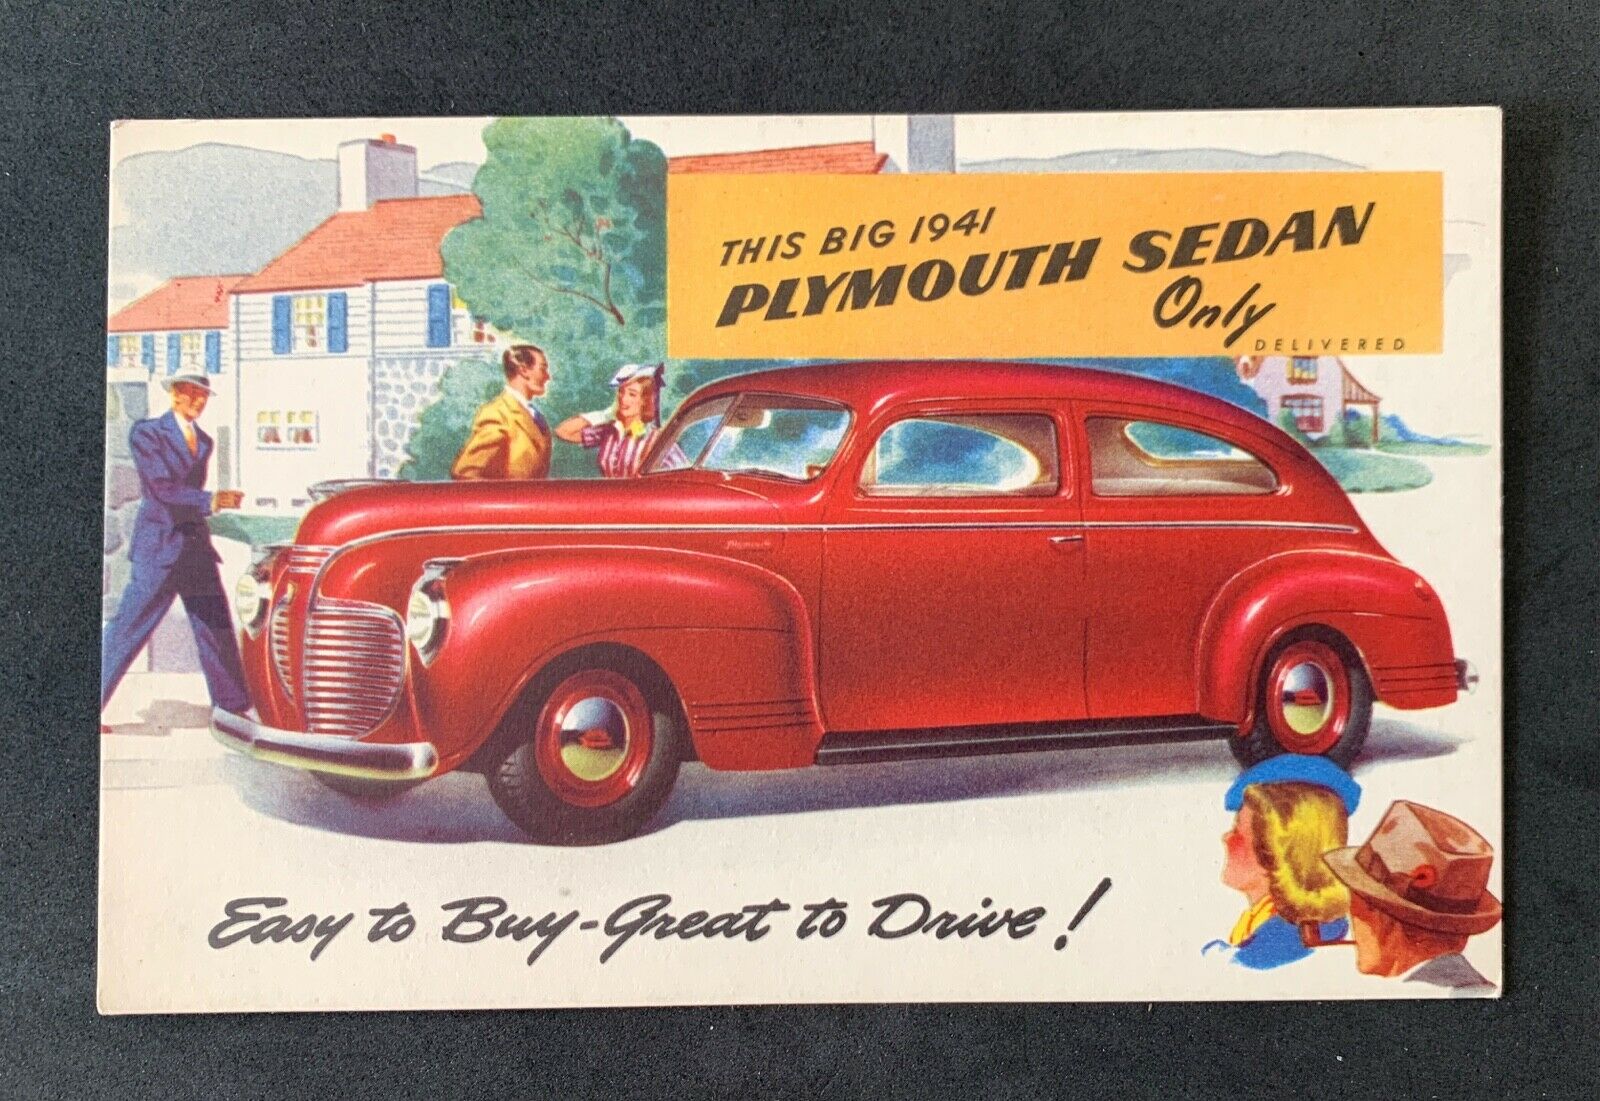 Vintage 1941 Plymouth - Original Issue Postcard - Easy To Buy - Great To Drive!